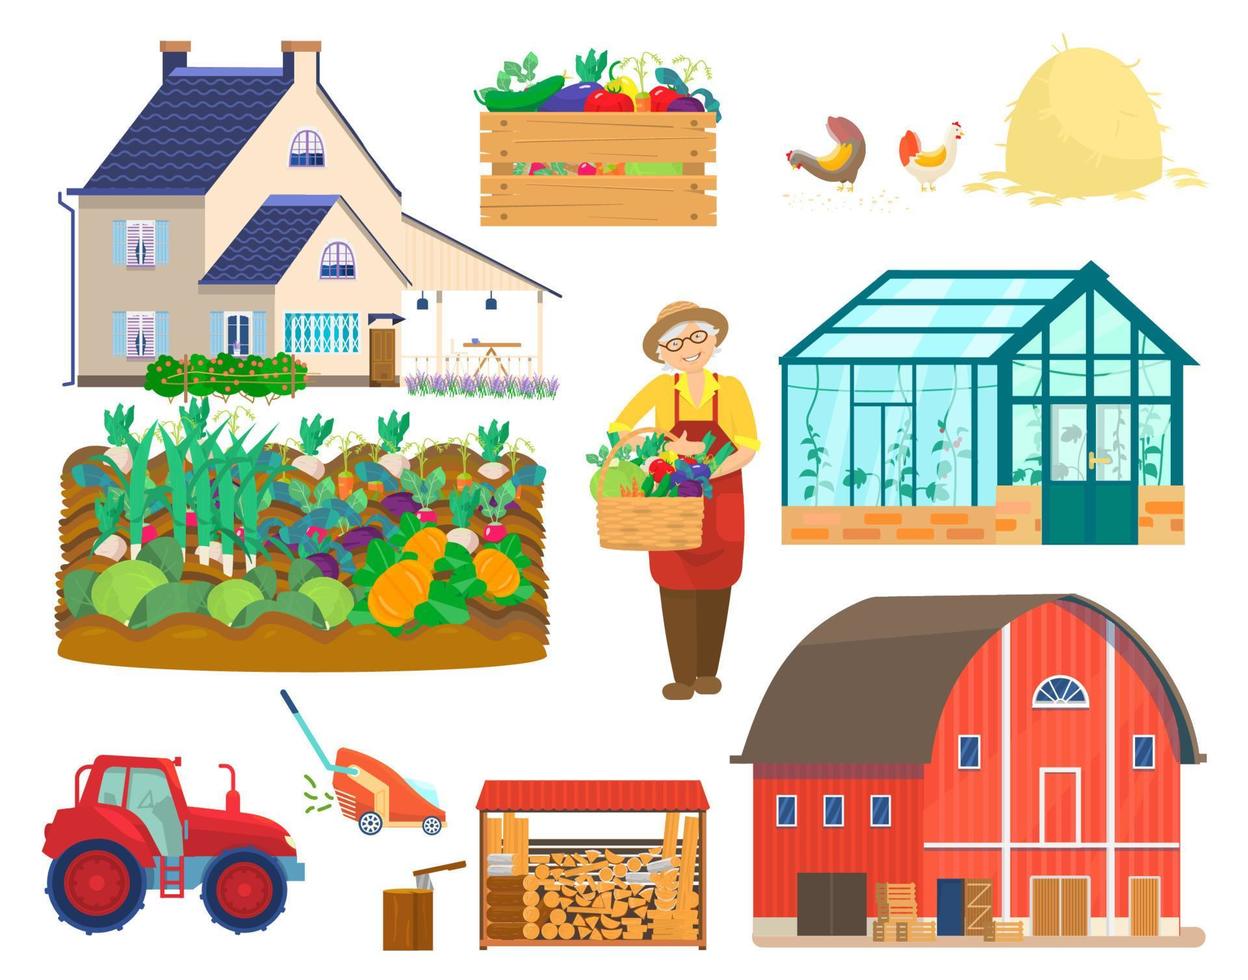 Farm vector set. Countryside set. Red barn, vegetable garden, tractor, greenhouse, woodpile, firewood, lawnmower, gardener with harvest in basket, haystack, chikens, tractor, boxe with vegetables.